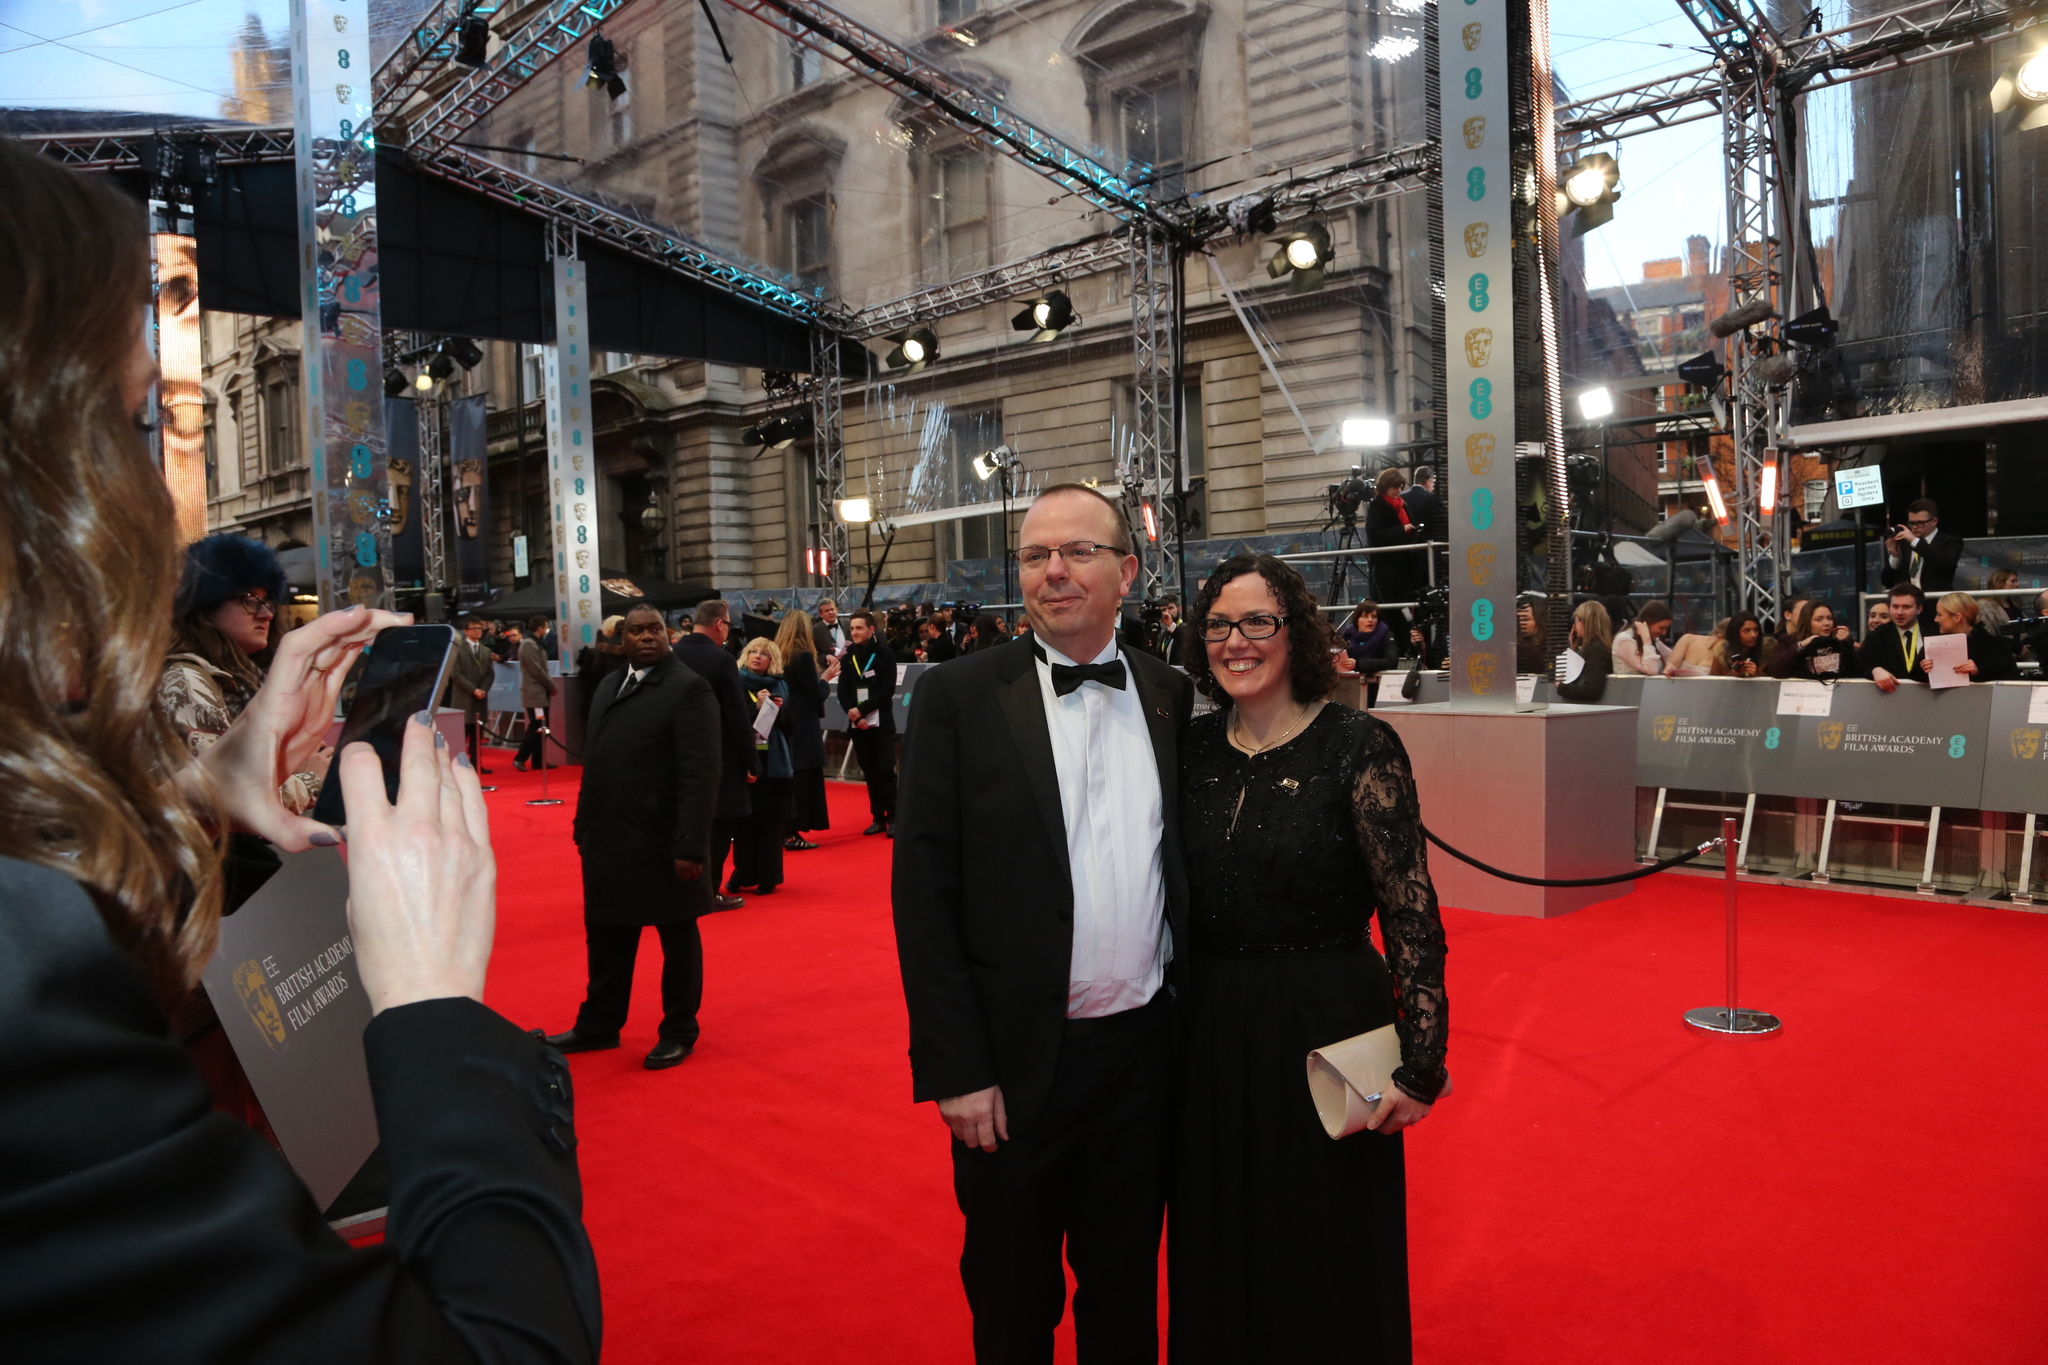 Col and Karen Needham arrive at the Royal Opera House, London for the EE British Academy Film Awards on Sunday 16 February 2014.